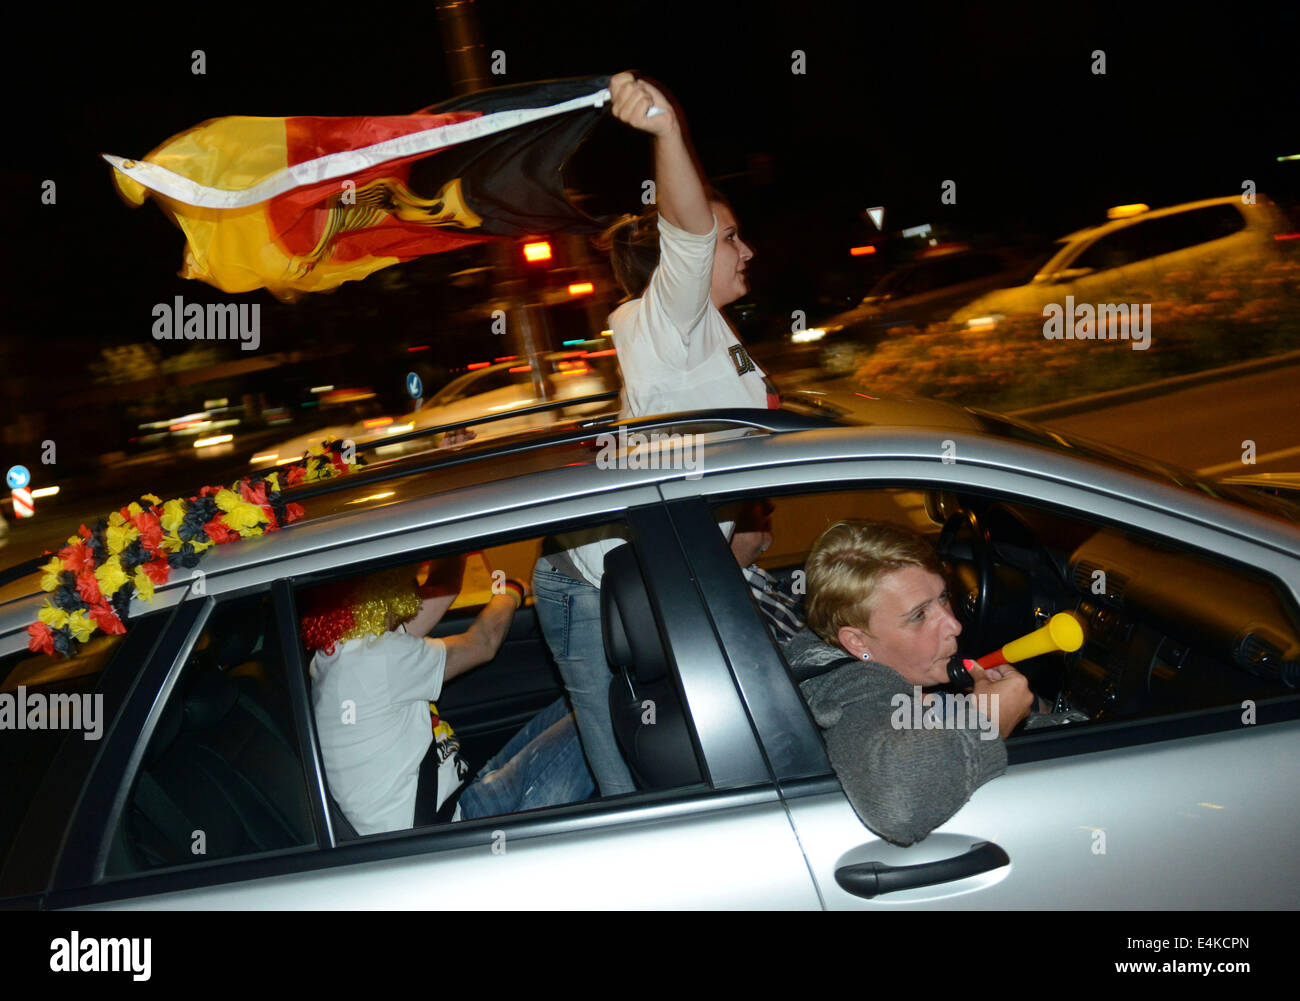 Dortmund, Germany. 13th July, 2014. Soccer fans cheer after the FIFA World Cup 2014 Final match between Germany and Argentina in Dortmund, Germany, 13 July 2014. Germany won over Argentina 1-0, and became World Champion. Photo: Caroline Seidel/dpa/Alamy Live News Stock Photo